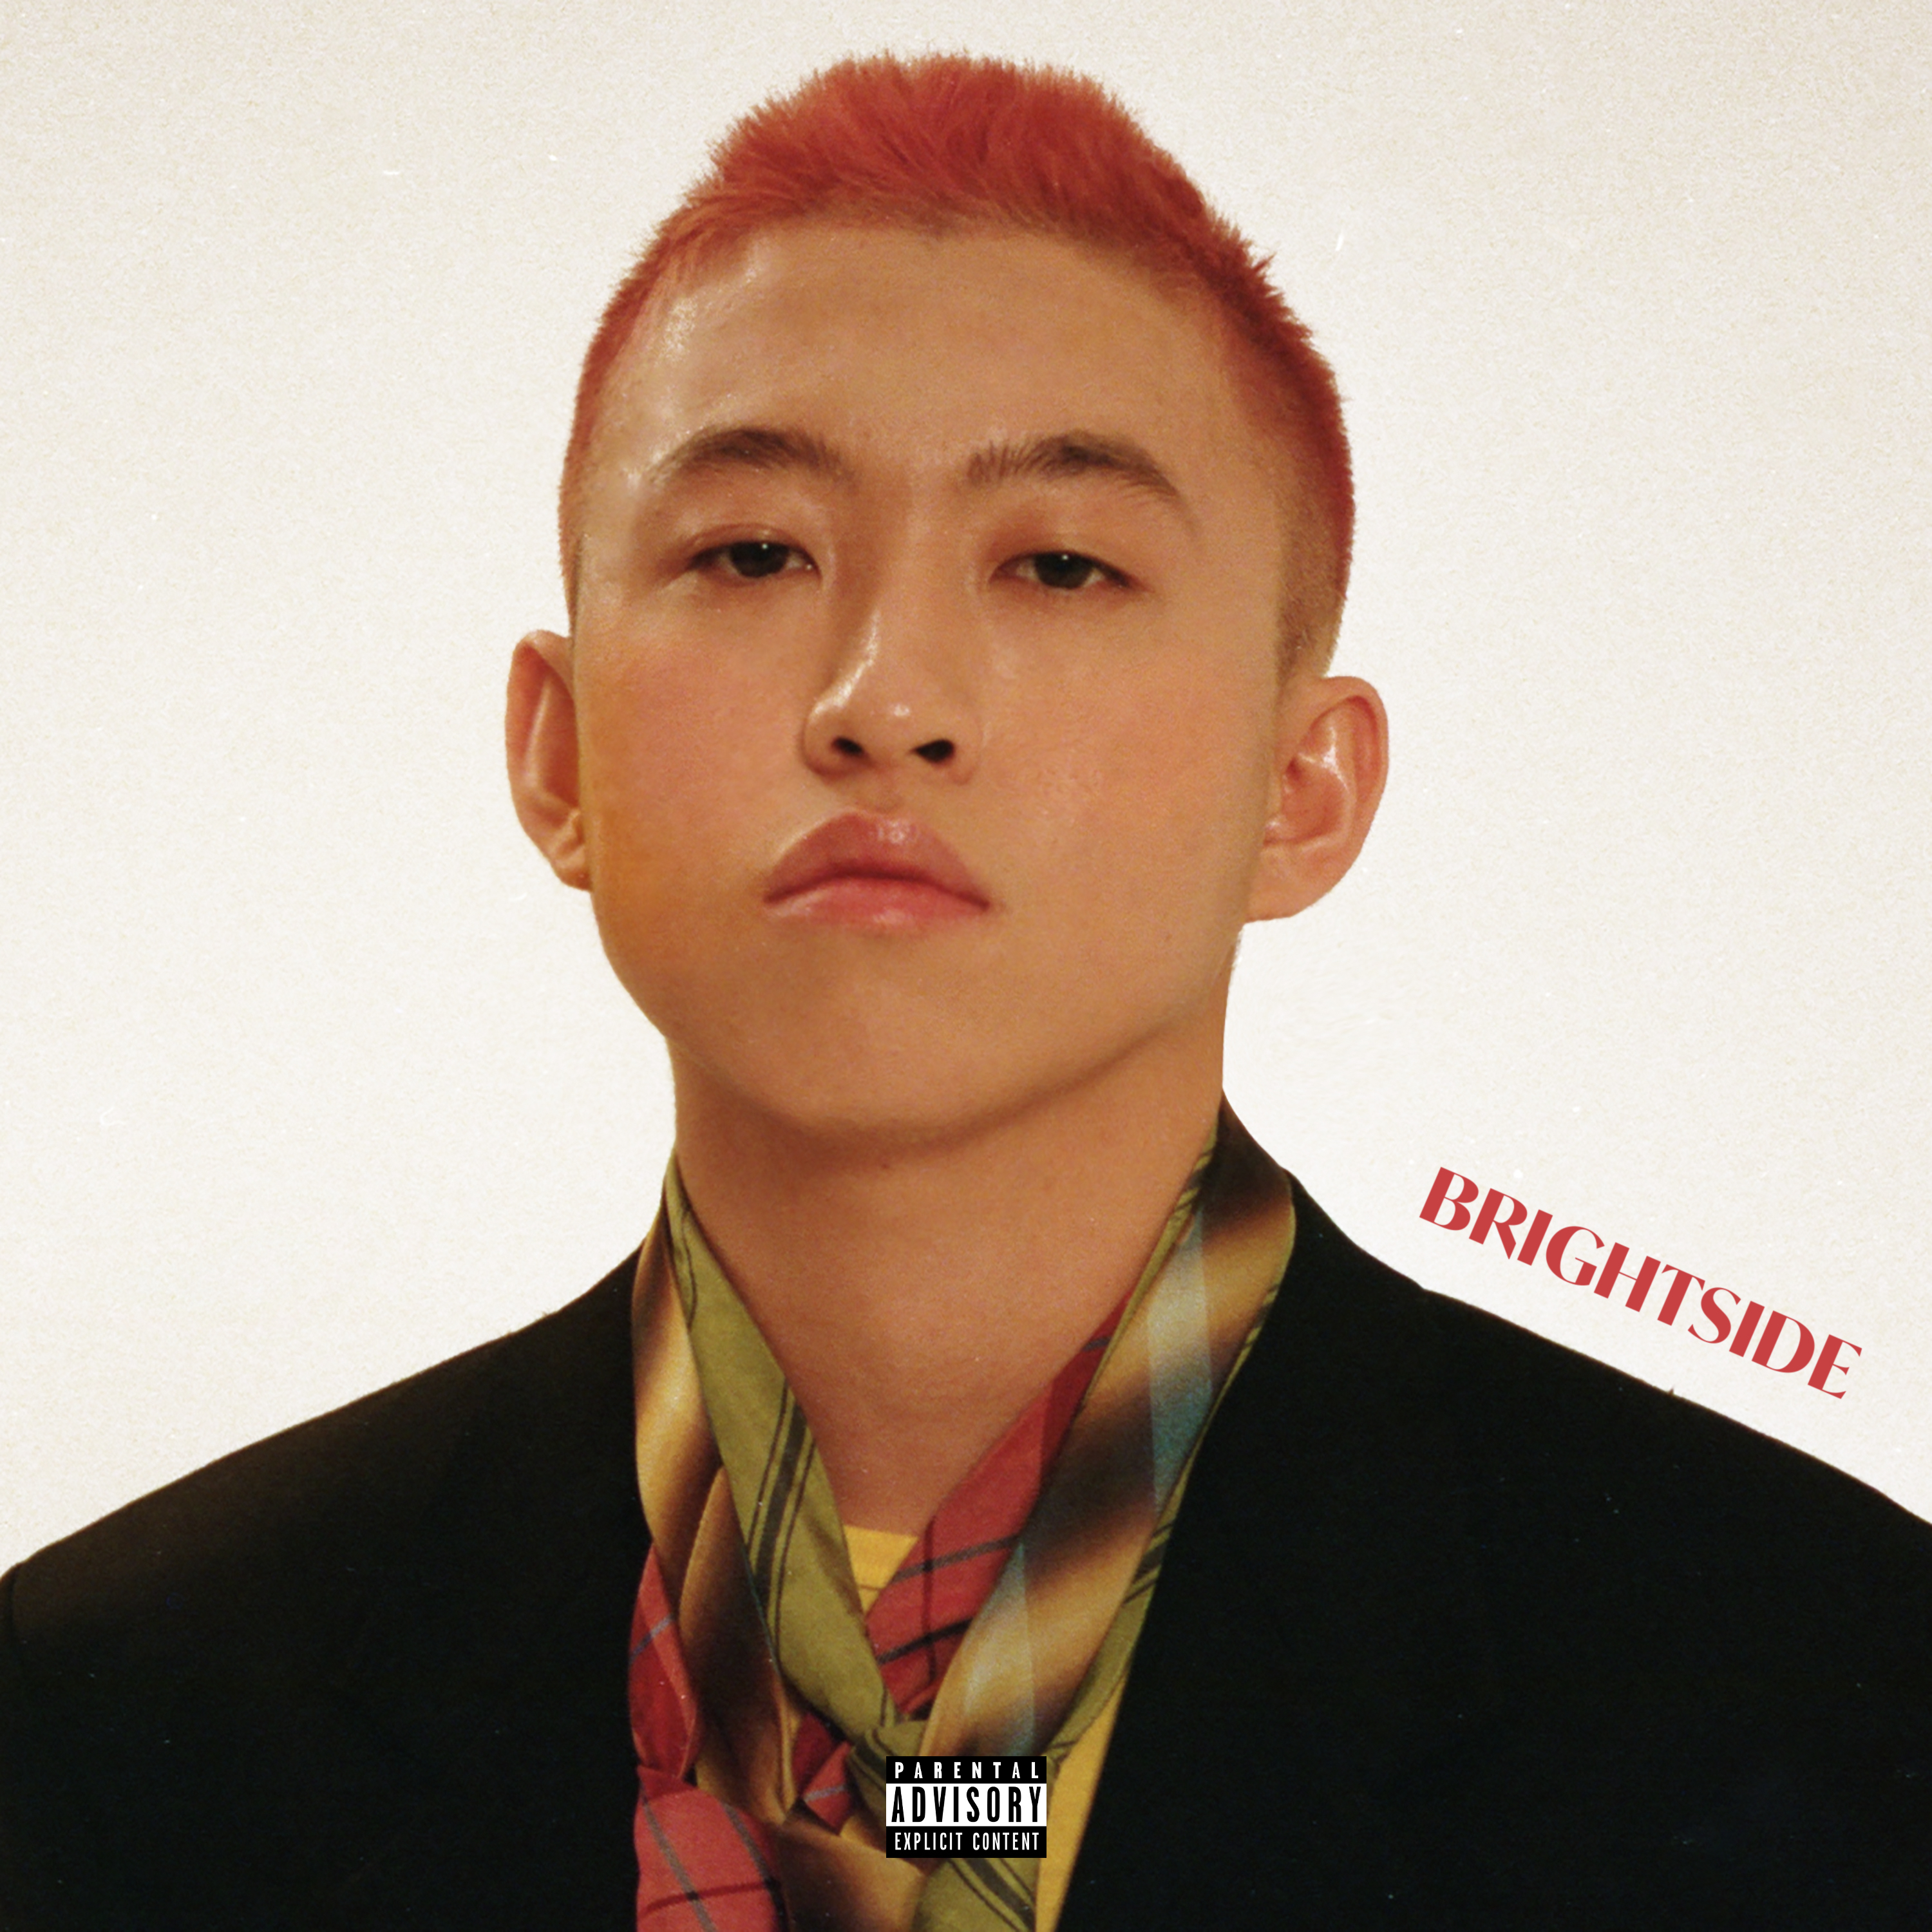 Rich Brian Surprises Fans With New EP “Brightside”